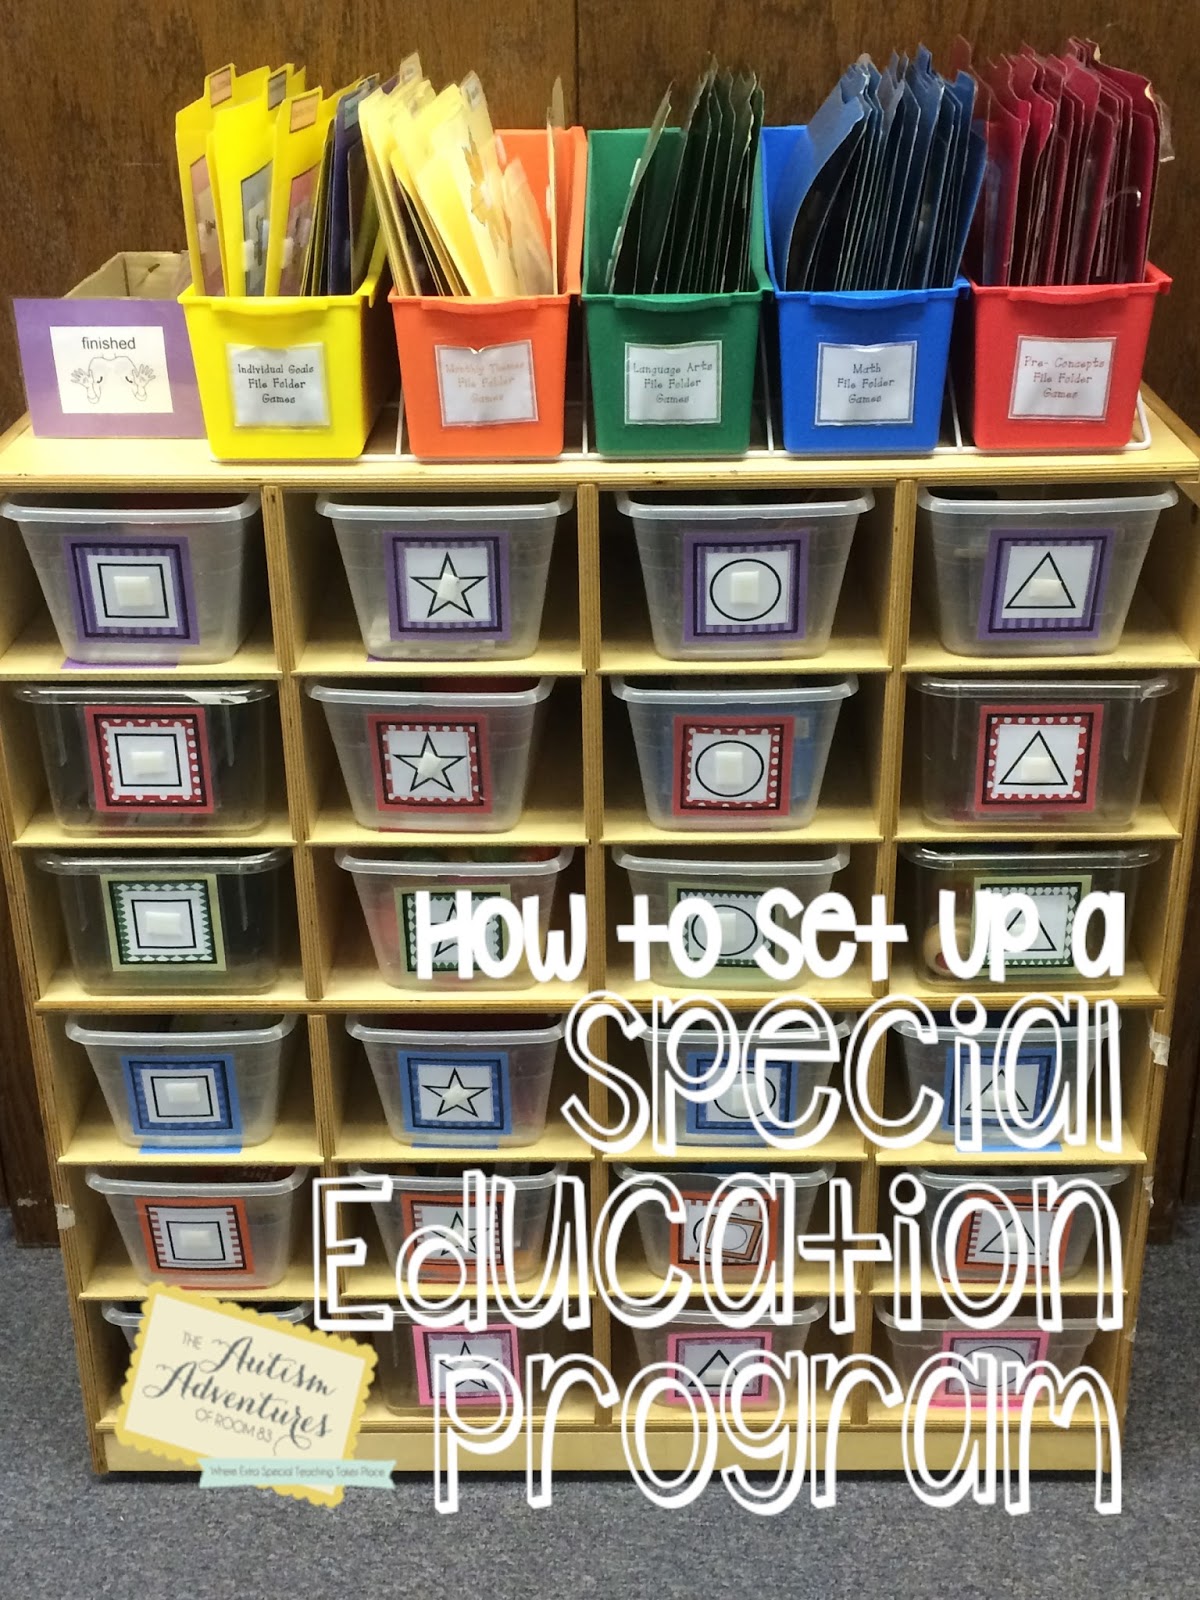 How To Set Up A Special Education Program”- Implementing